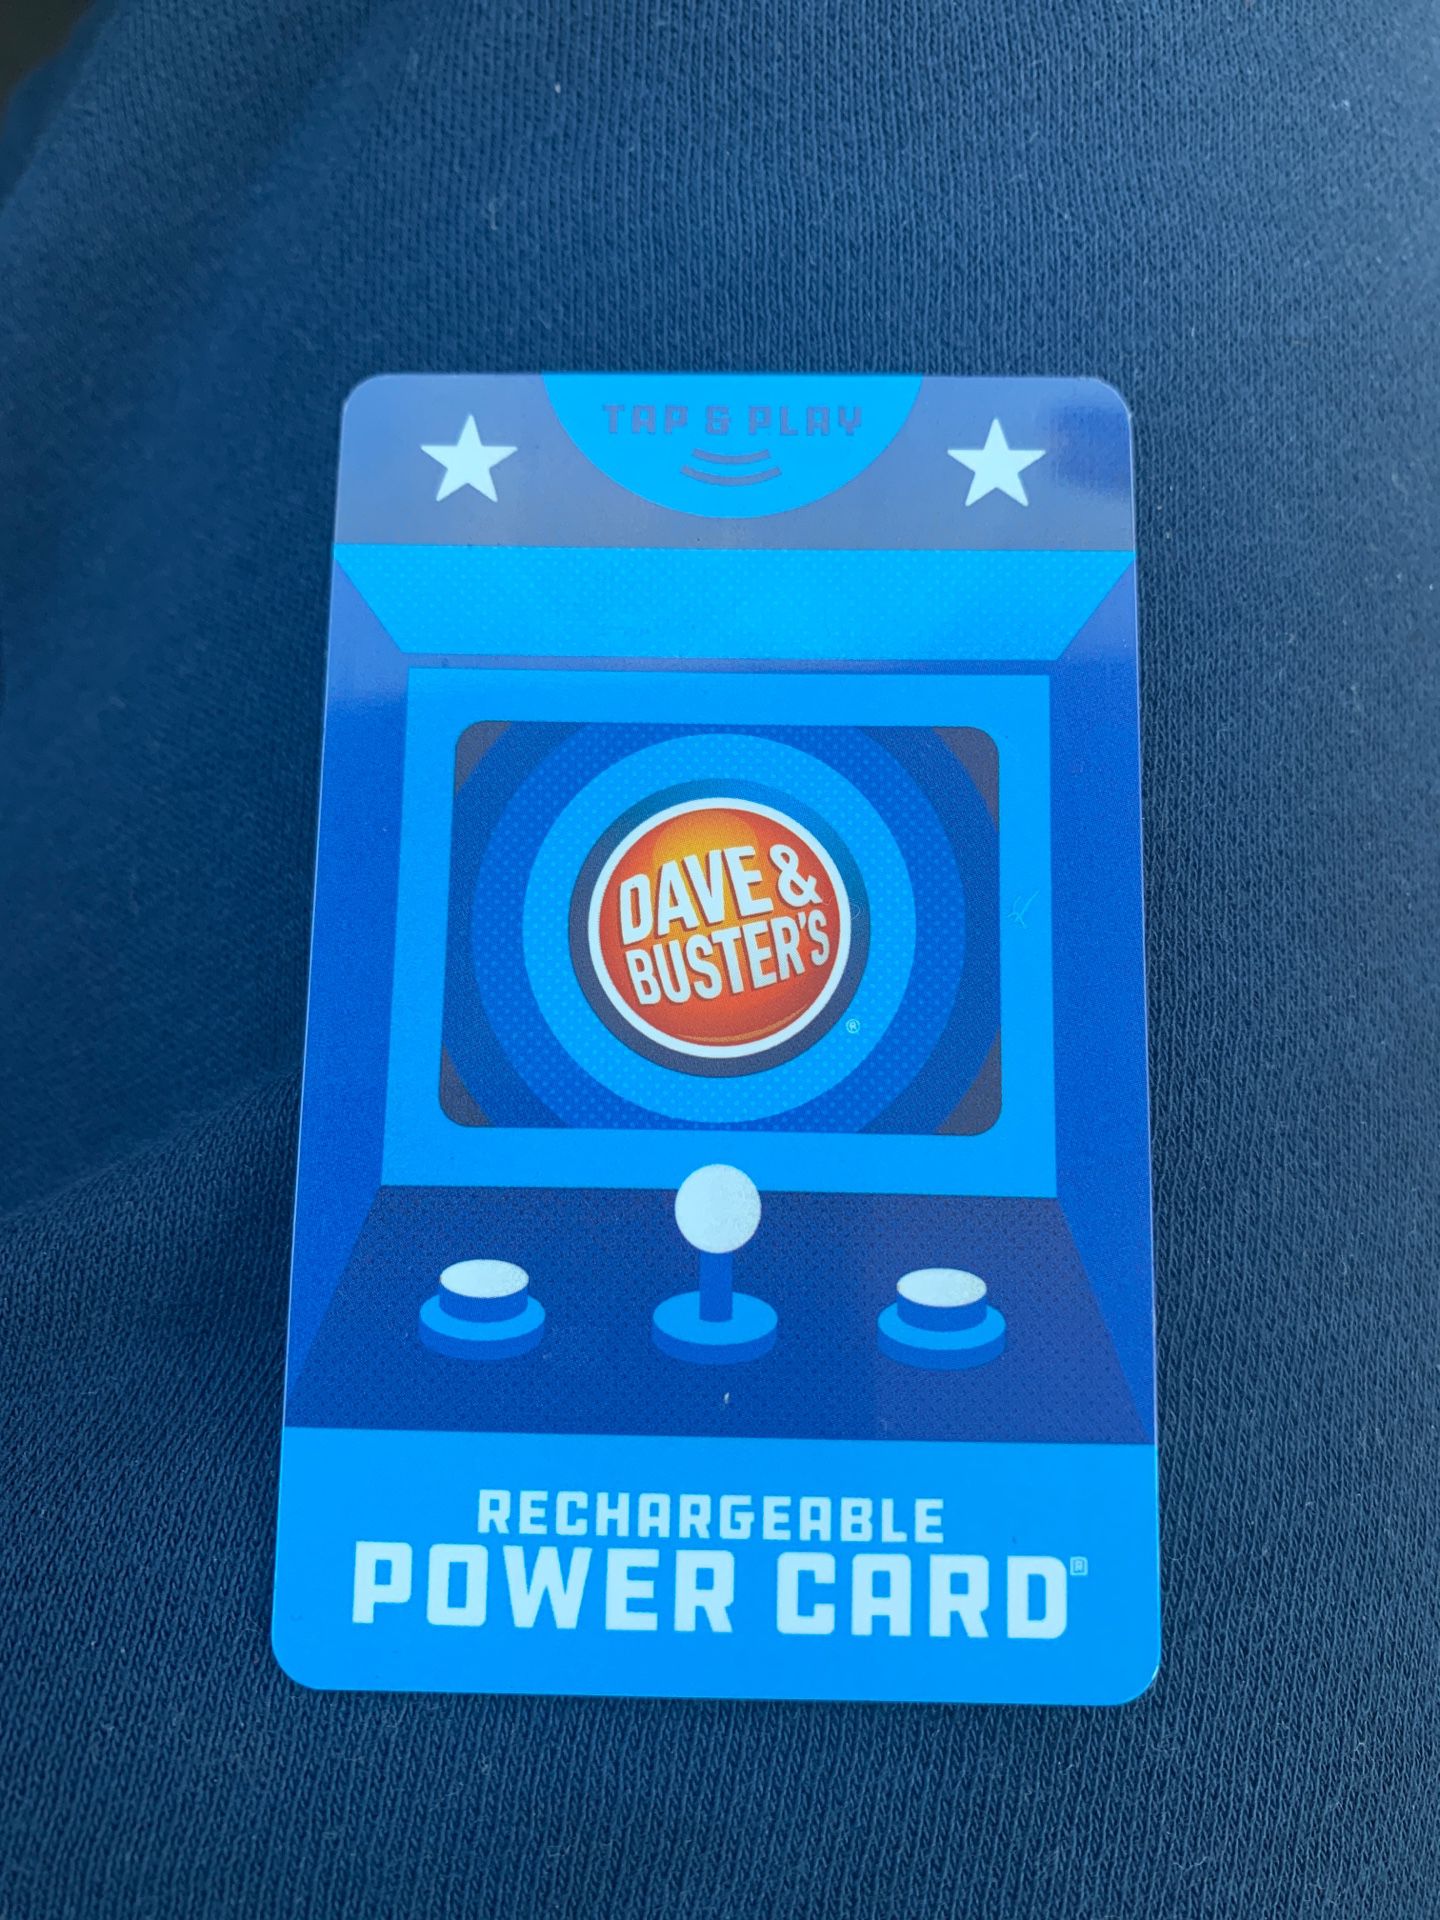 Dave & busters Game Cards